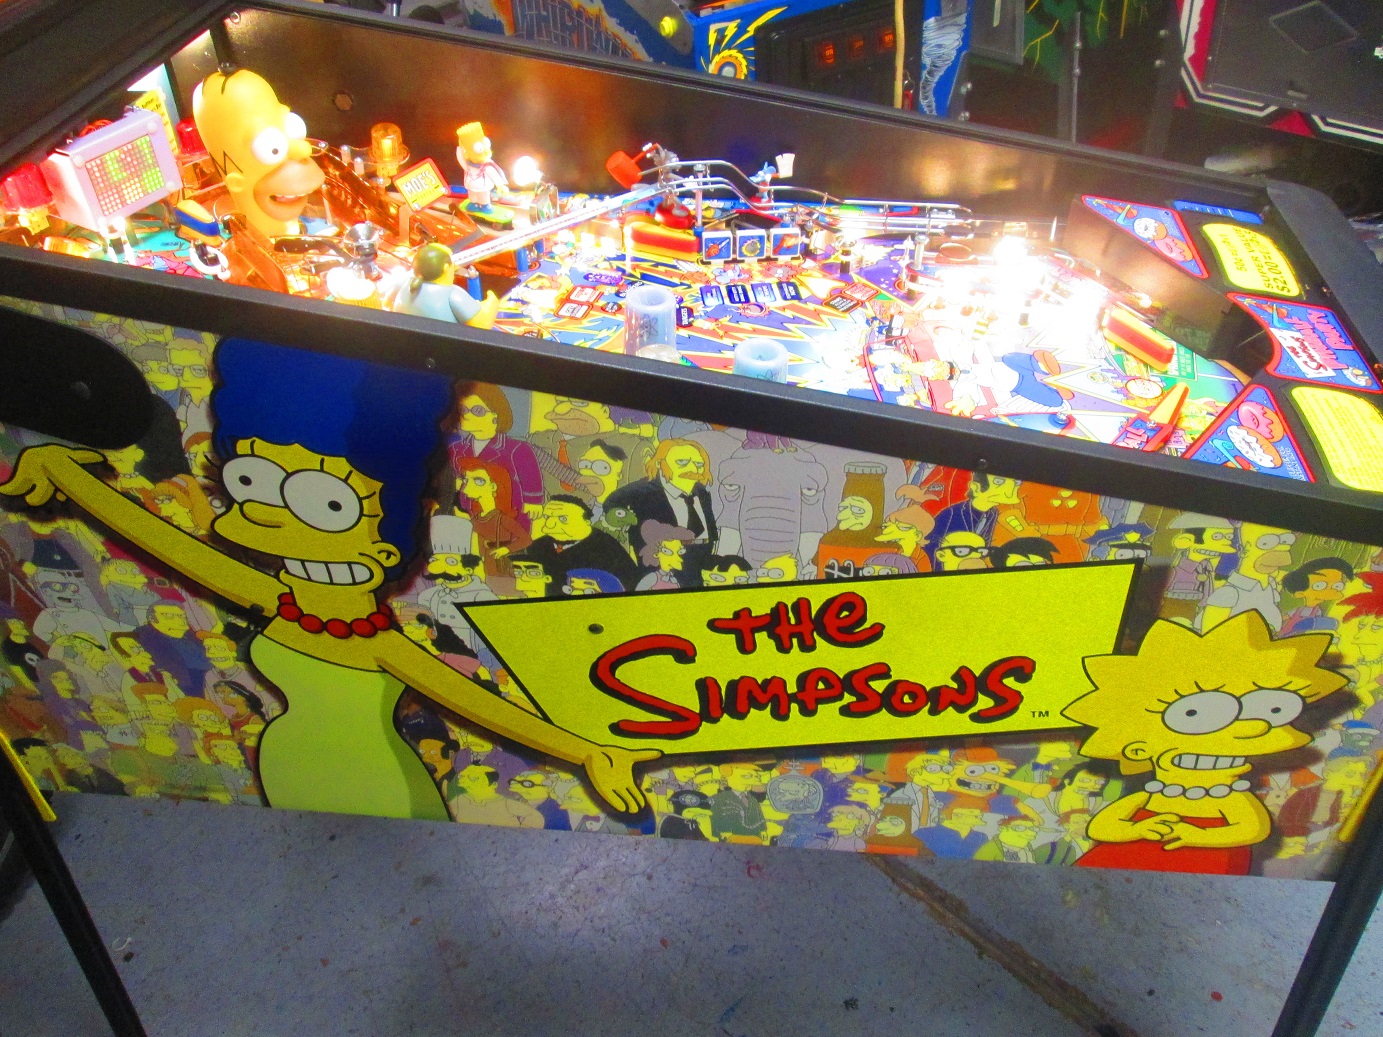 Interesting note on this game: All the voice work was by Dan Castellaneta, Nancy Cartwright, and Hank Azaria, custom recorded for the game. Cabinet and backglass art was created by Simpsons’ guru Matt Groening’s team.